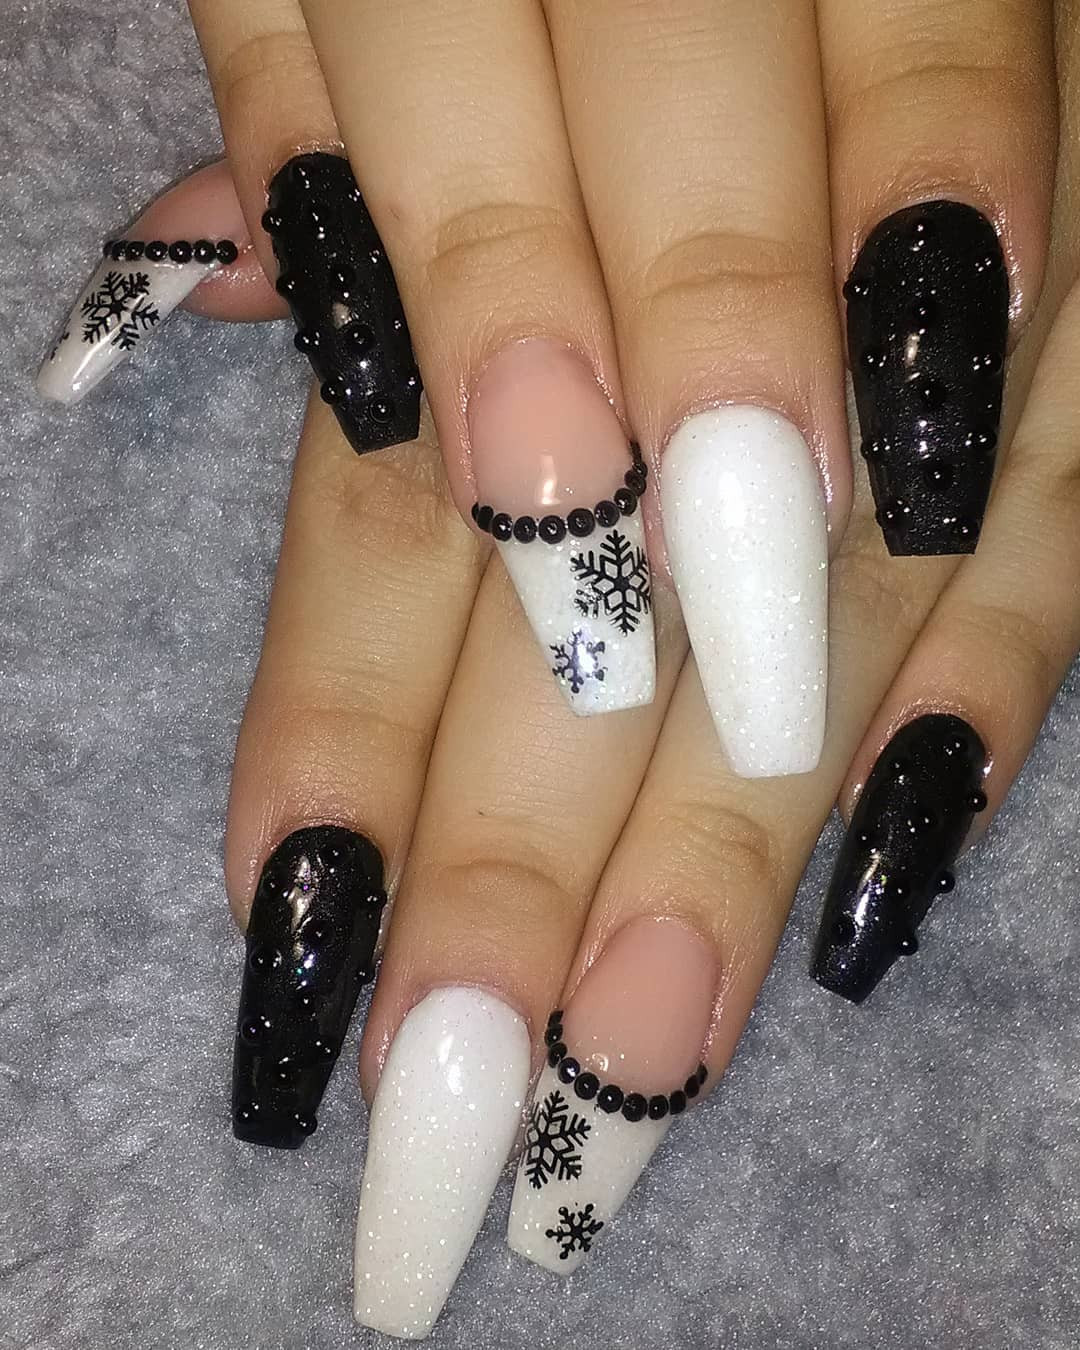 52 White Acrylic Nails Designs to Finish Your Trendy Look